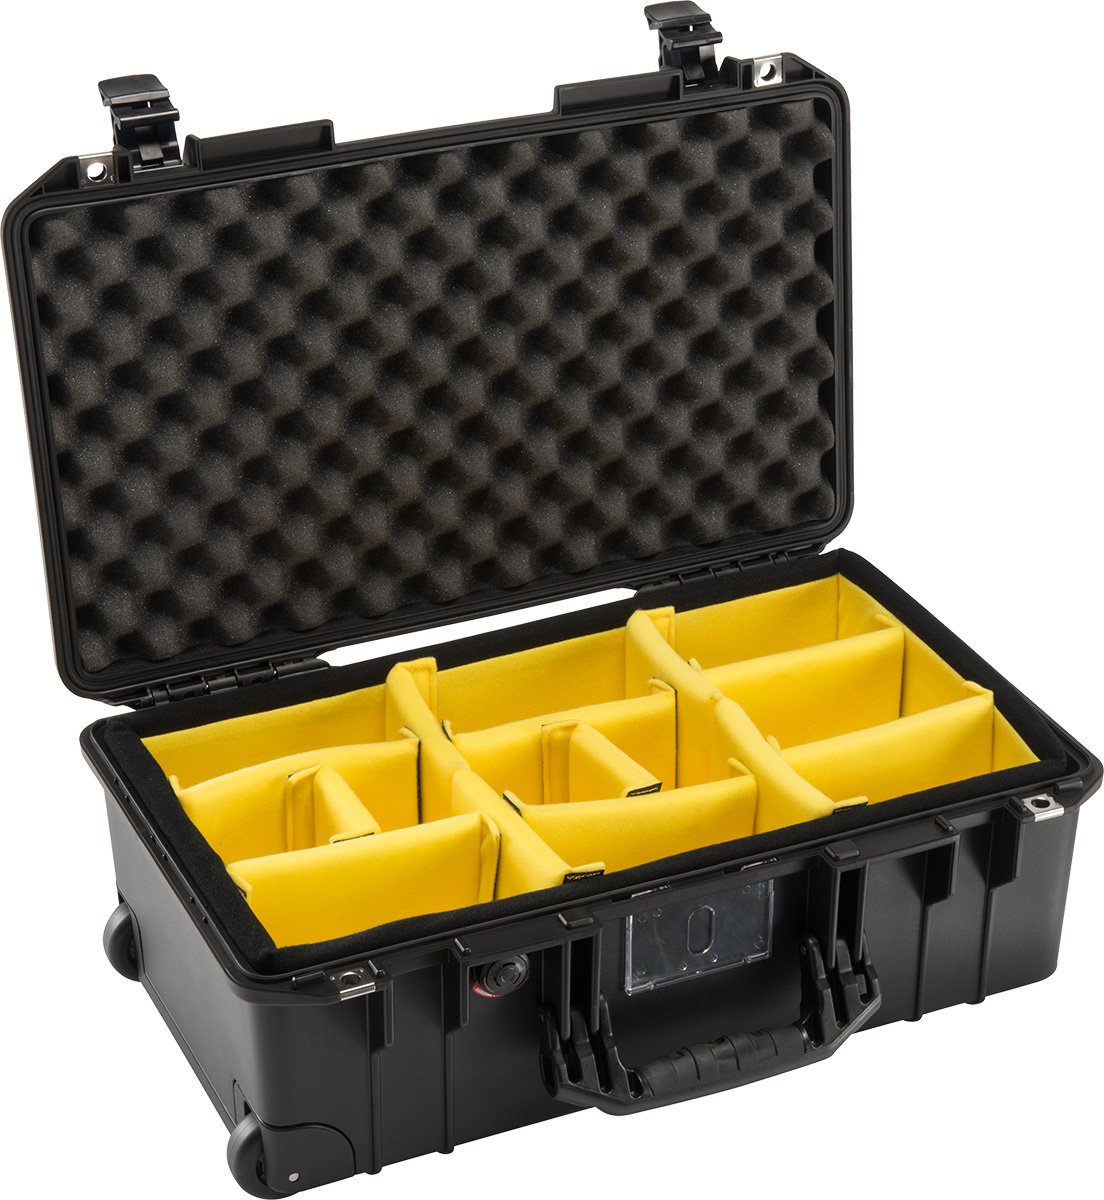 Pelican Protector Case 1535 Carry-On Wheeled Air Case - With Padded Dividers